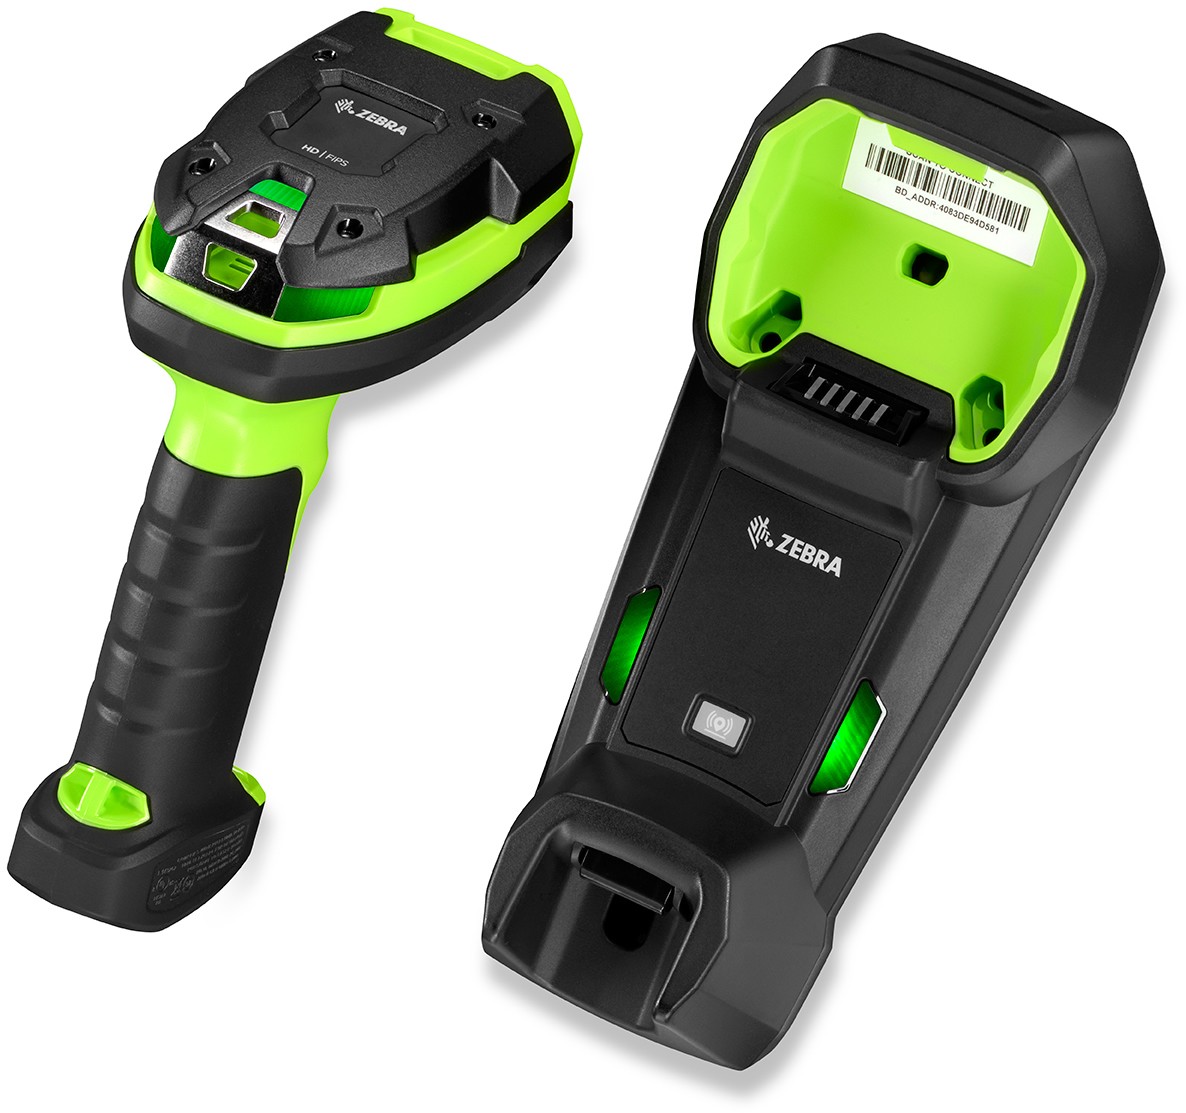 DS3678-HP Rugged Green Standard Cradle USB Kit - India and Korea: DS3678-HD2F003VZK Scanner, CBA-U42-S07PAR Shielded USB Cable Supports 12V P/S, STB3678-C100F3WW Cradle, PWR-BGA12V50W0WW Power Supply and CBL-DC-451A1-01 DC Line Cord